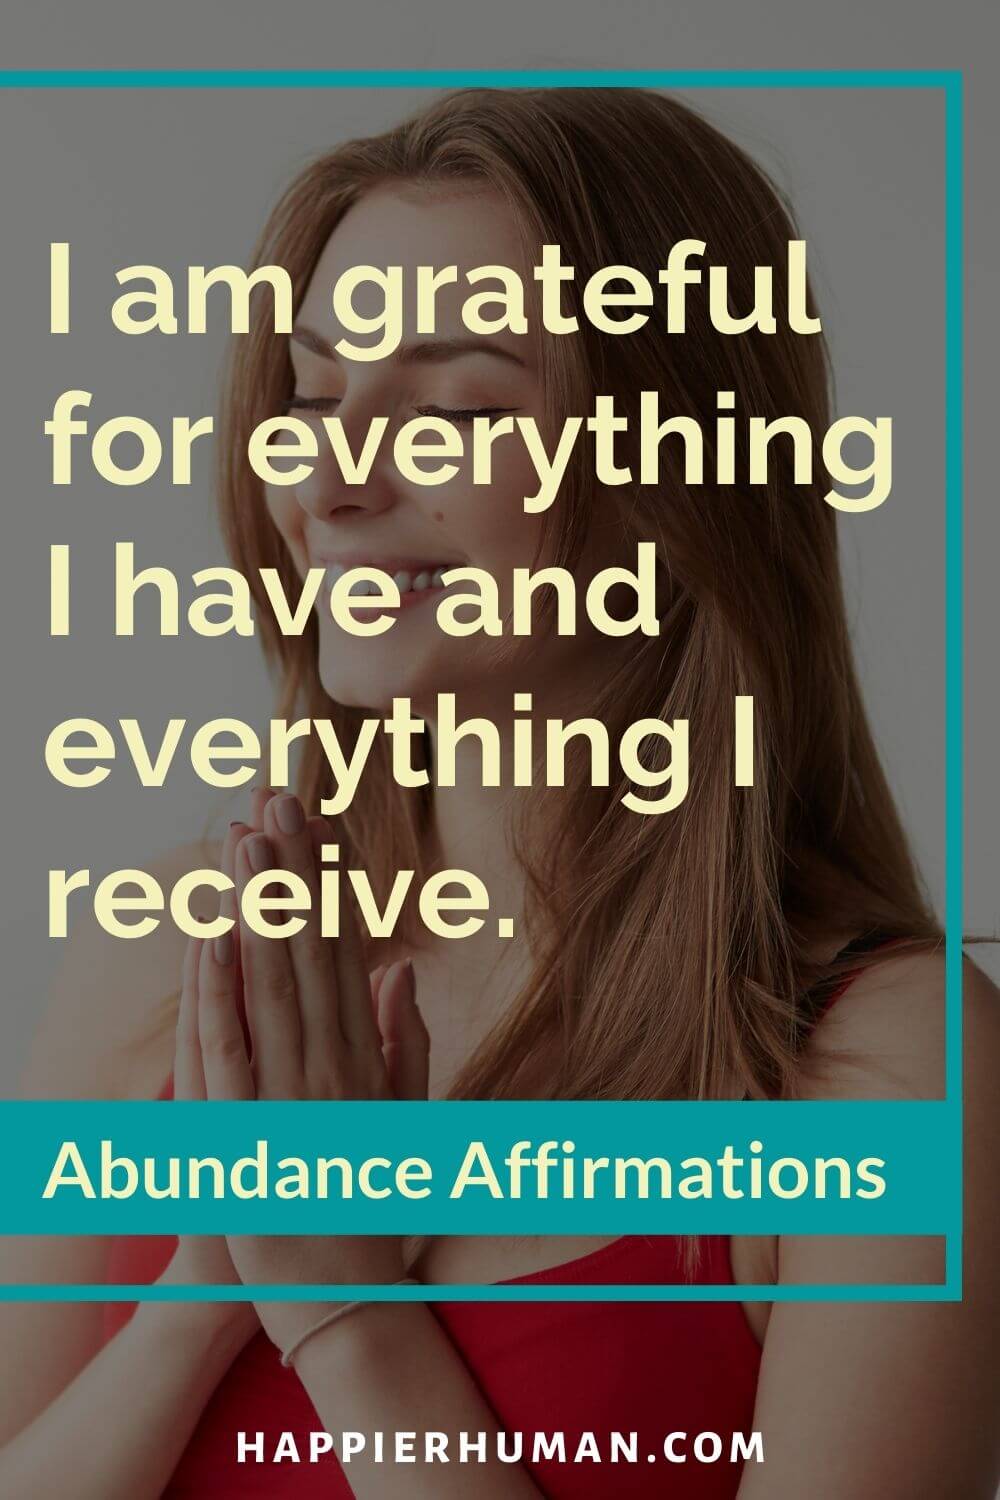 Abundance Affirmations - I am grateful for everything I have and everything I receive. | law of attraction abundance affirmations | short abundance affirmations | 10 money affirmations that really work